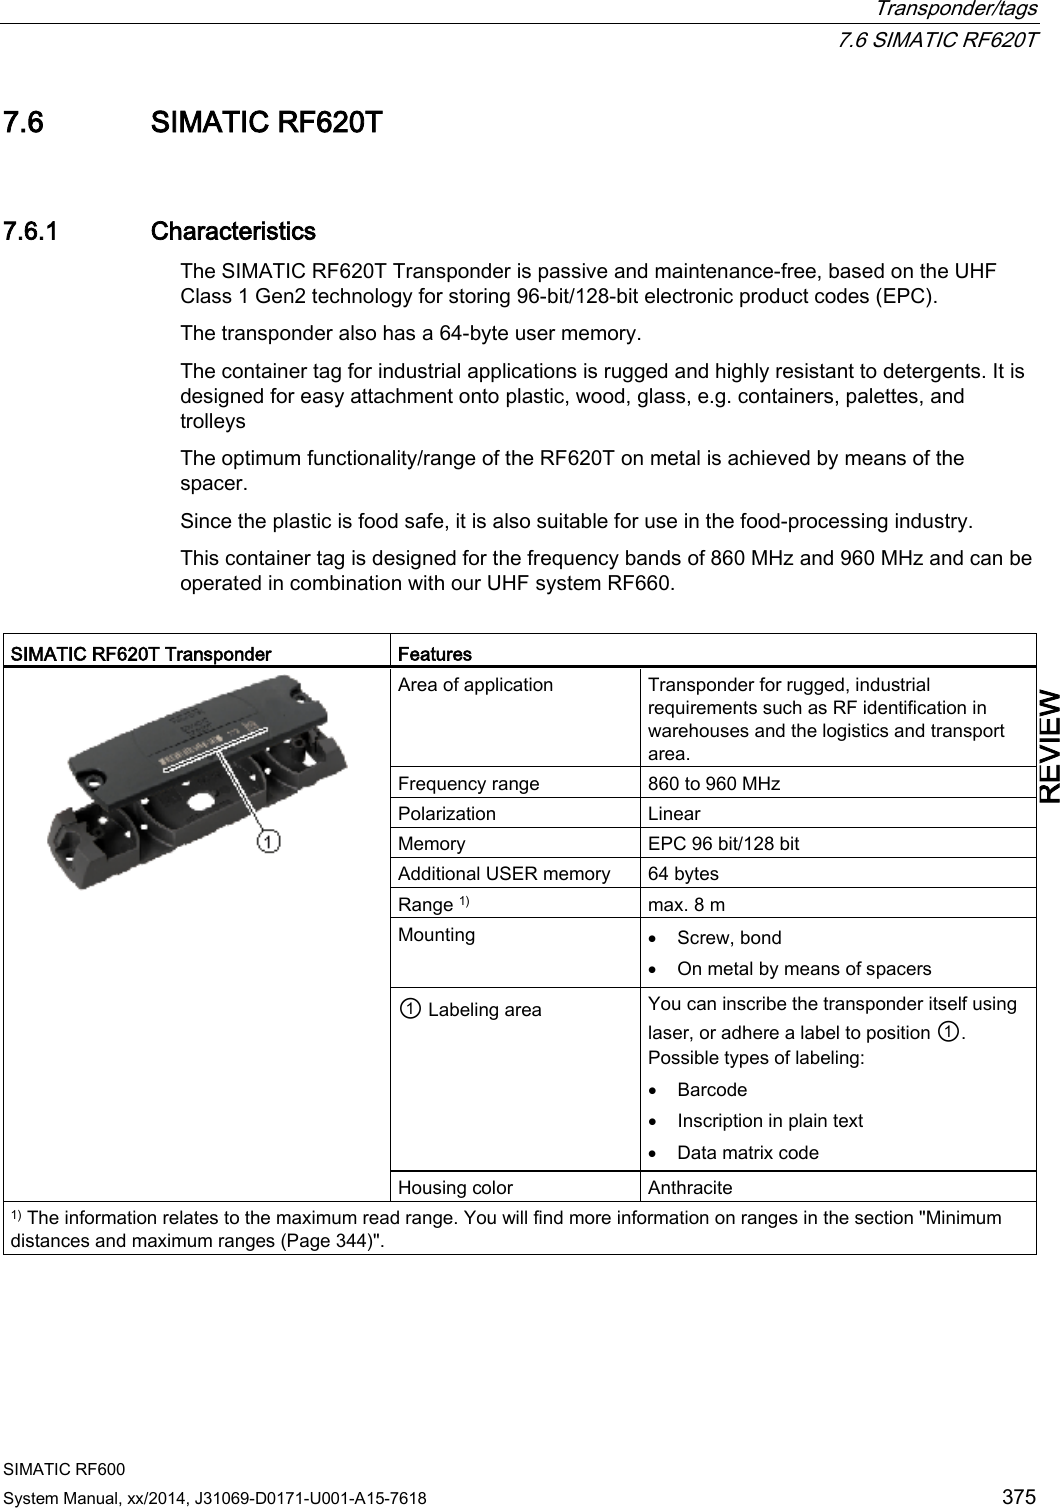  Transponder/tags  7.6 SIMATIC RF620T SIMATIC RF600 System Manual, xx/2014, J31069-D0171-U001-A15-7618 375 REVIEW 7.6 SIMATIC RF620T 7.6.1 Characteristics The SIMATIC RF620T Transponder is passive and maintenance-free, based on the UHF Class 1 Gen2 technology for storing 96-bit/128-bit electronic product codes (EPC). The transponder also has a 64-byte user memory. The container tag for industrial applications is rugged and highly resistant to detergents. It is designed for easy attachment onto plastic, wood, glass, e.g. containers, palettes, and trolleys The optimum functionality/range of the RF620T on metal is achieved by means of the spacer. Since the plastic is food safe, it is also suitable for use in the food-processing industry.  This container tag is designed for the frequency bands of 860 MHz and 960 MHz and can be operated in combination with our UHF system RF660.  SIMATIC RF620T Transponder  Features  Area of application Transponder for rugged, industrial requirements such as RF identification in warehouses and the logistics and transport area. Frequency range 860 to 960 MHz Polarization  Linear Memory EPC 96 bit/128 bit Additional USER memory 64 bytes Range 1) max. 8 m Mounting • Screw, bond • On metal by means of spacers ① Labeling area You can inscribe the transponder itself using laser, or adhere a label to position ①. Possible types of labeling: • Barcode • Inscription in plain text • Data matrix code Housing color Anthracite 1) The information relates to the maximum read range. You will find more information on ranges in the section &quot;Minimum distances and maximum ranges (Page 344)&quot;. 